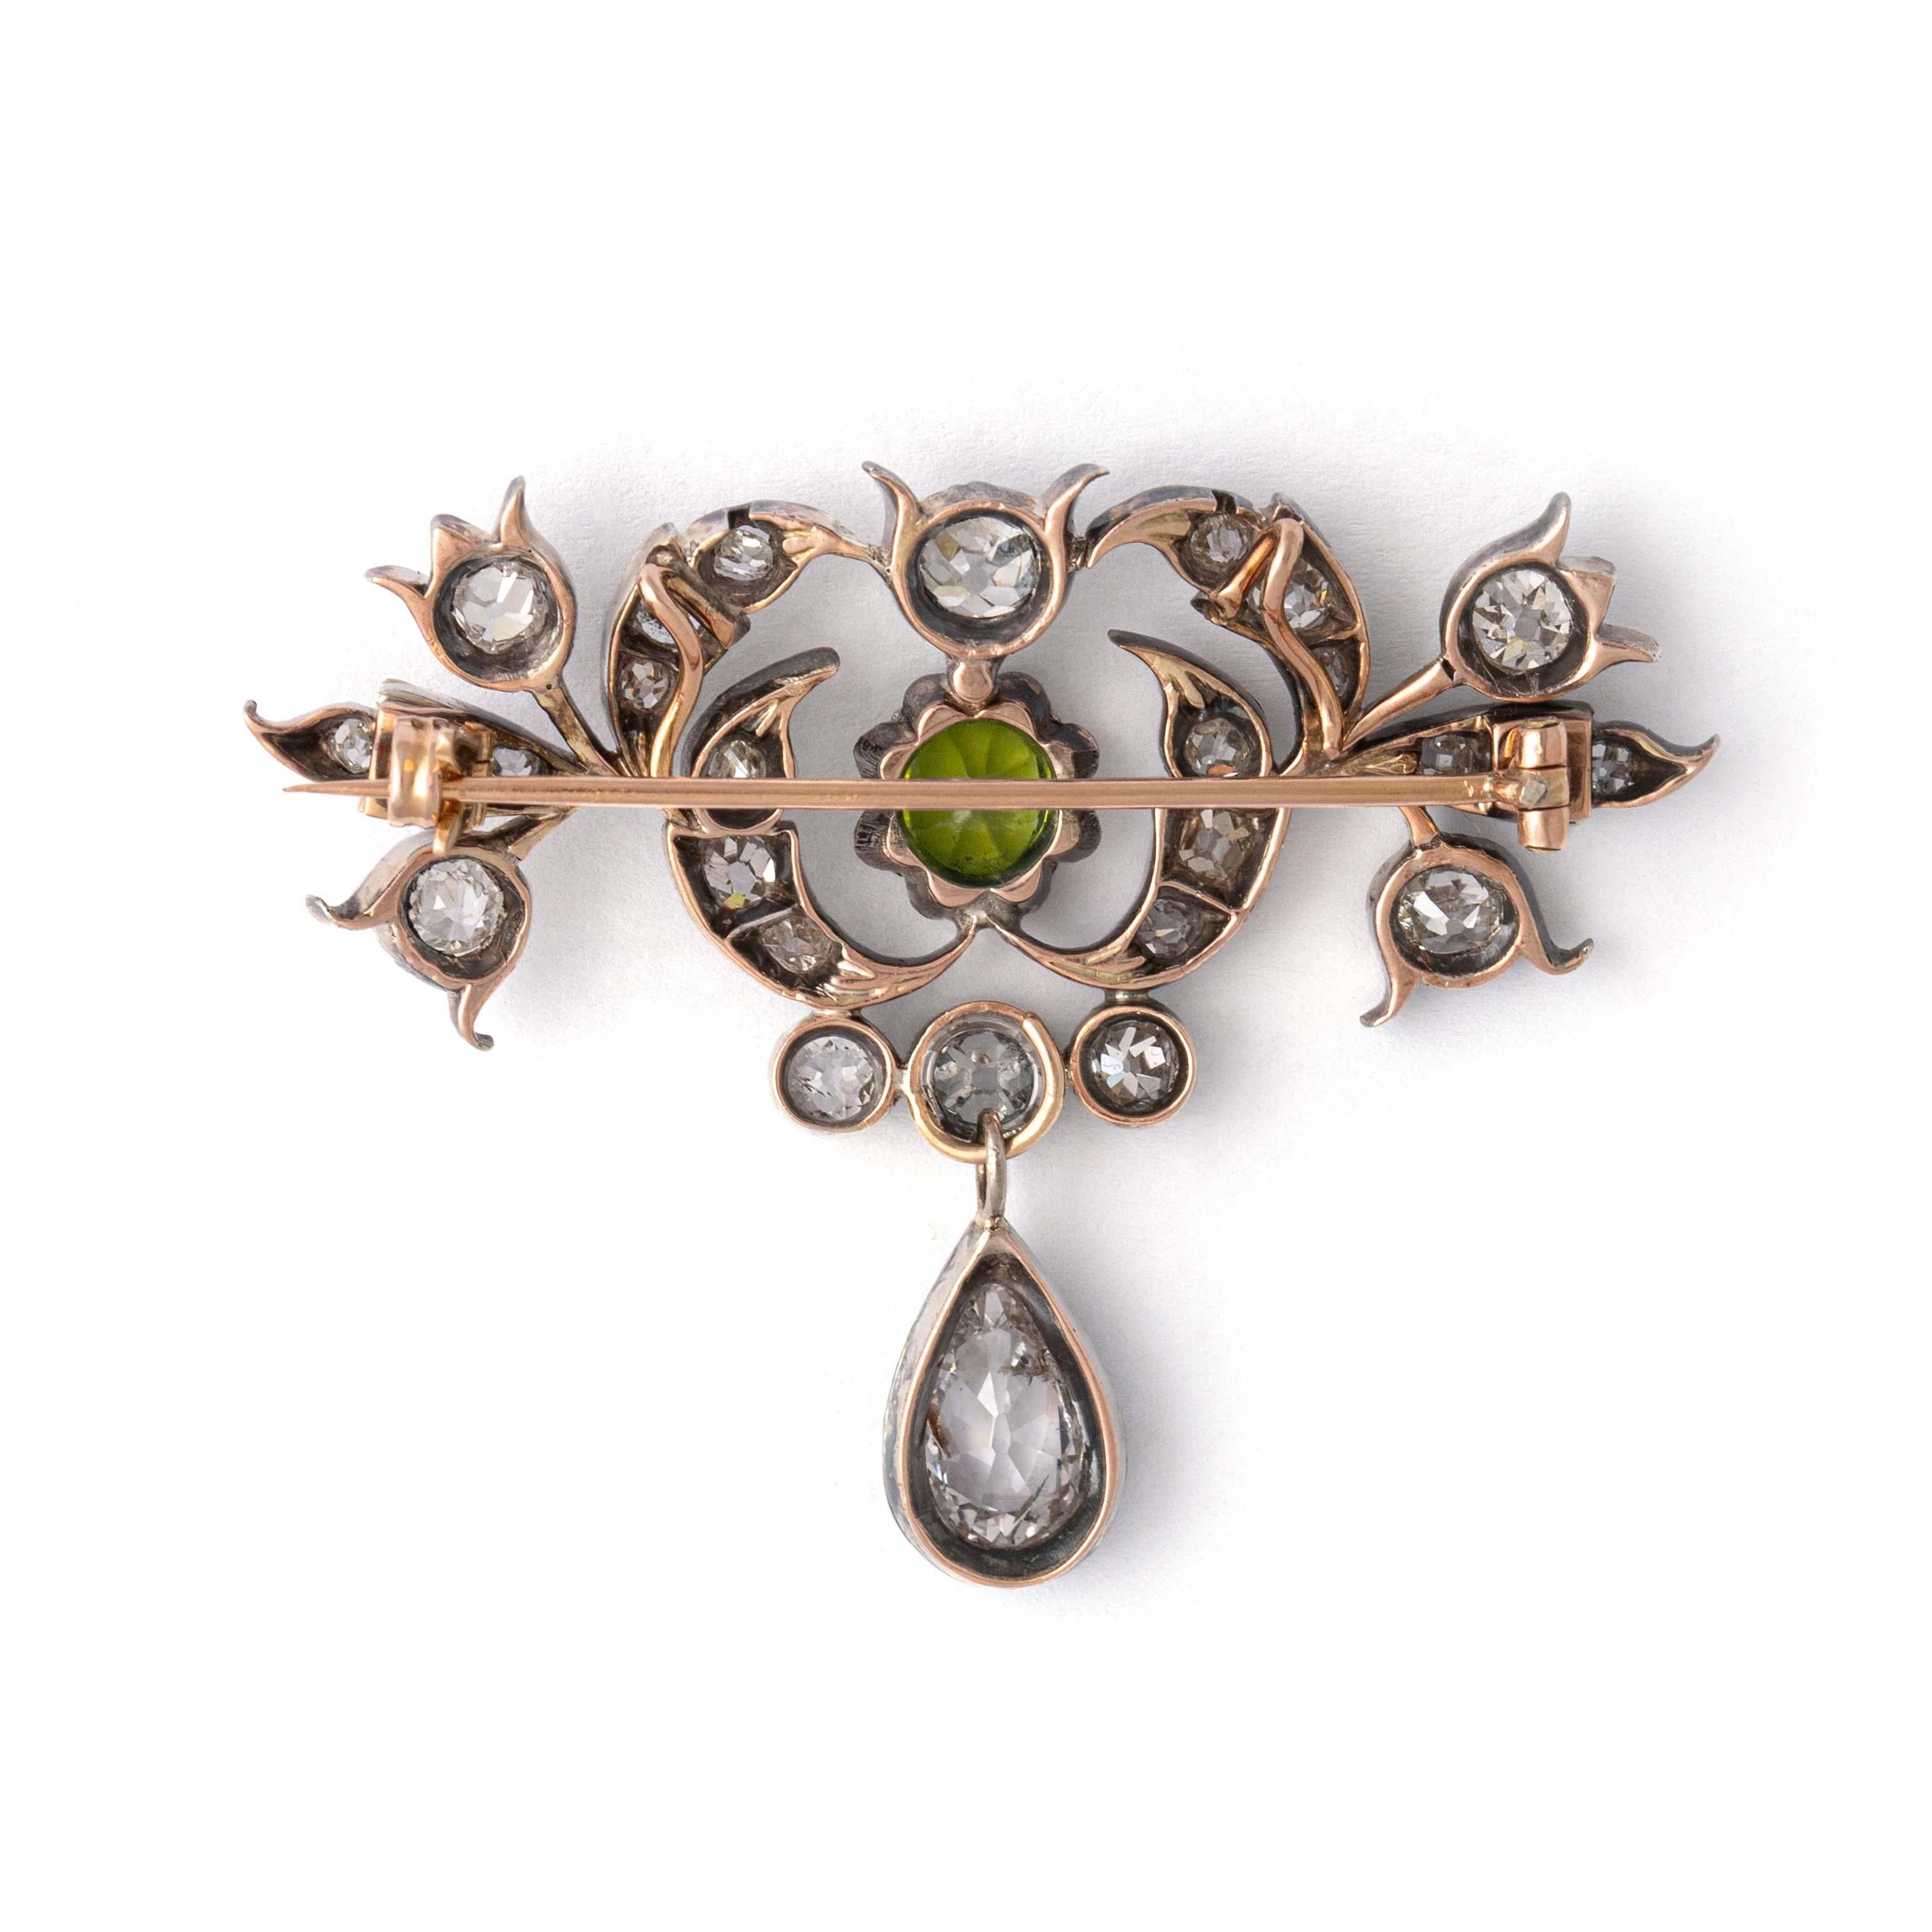 Antique Diamond and Peridot Brooch Pendant Late 19th Century For Sale 7